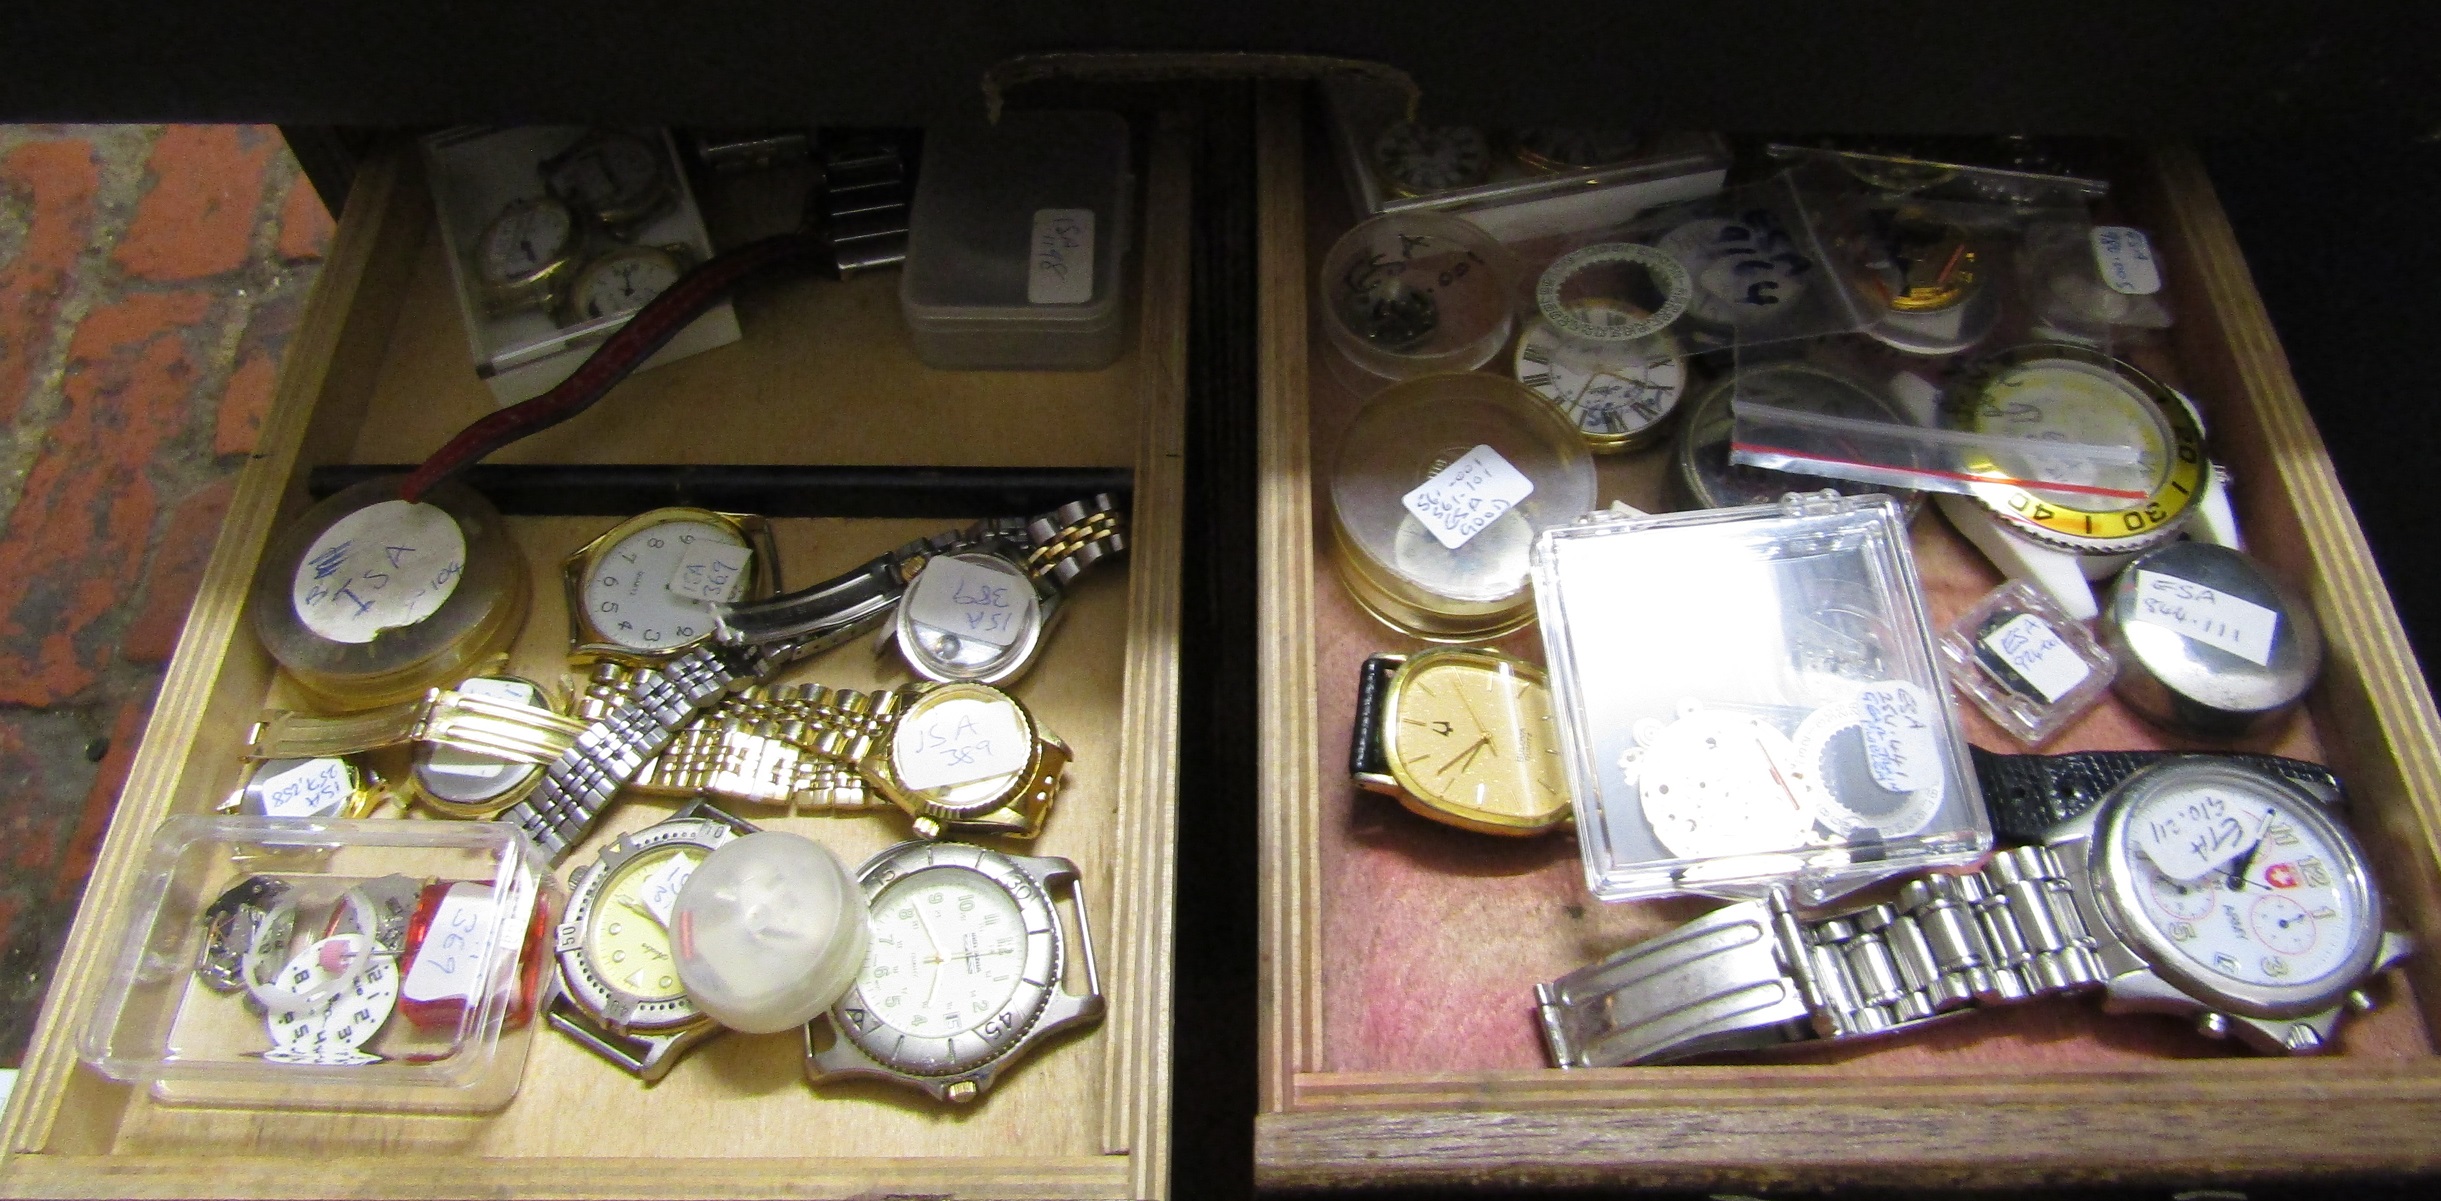 Watchmakers cabinet including mainsprings, watch movements, lathe tools, gravers, washers, - Image 10 of 11